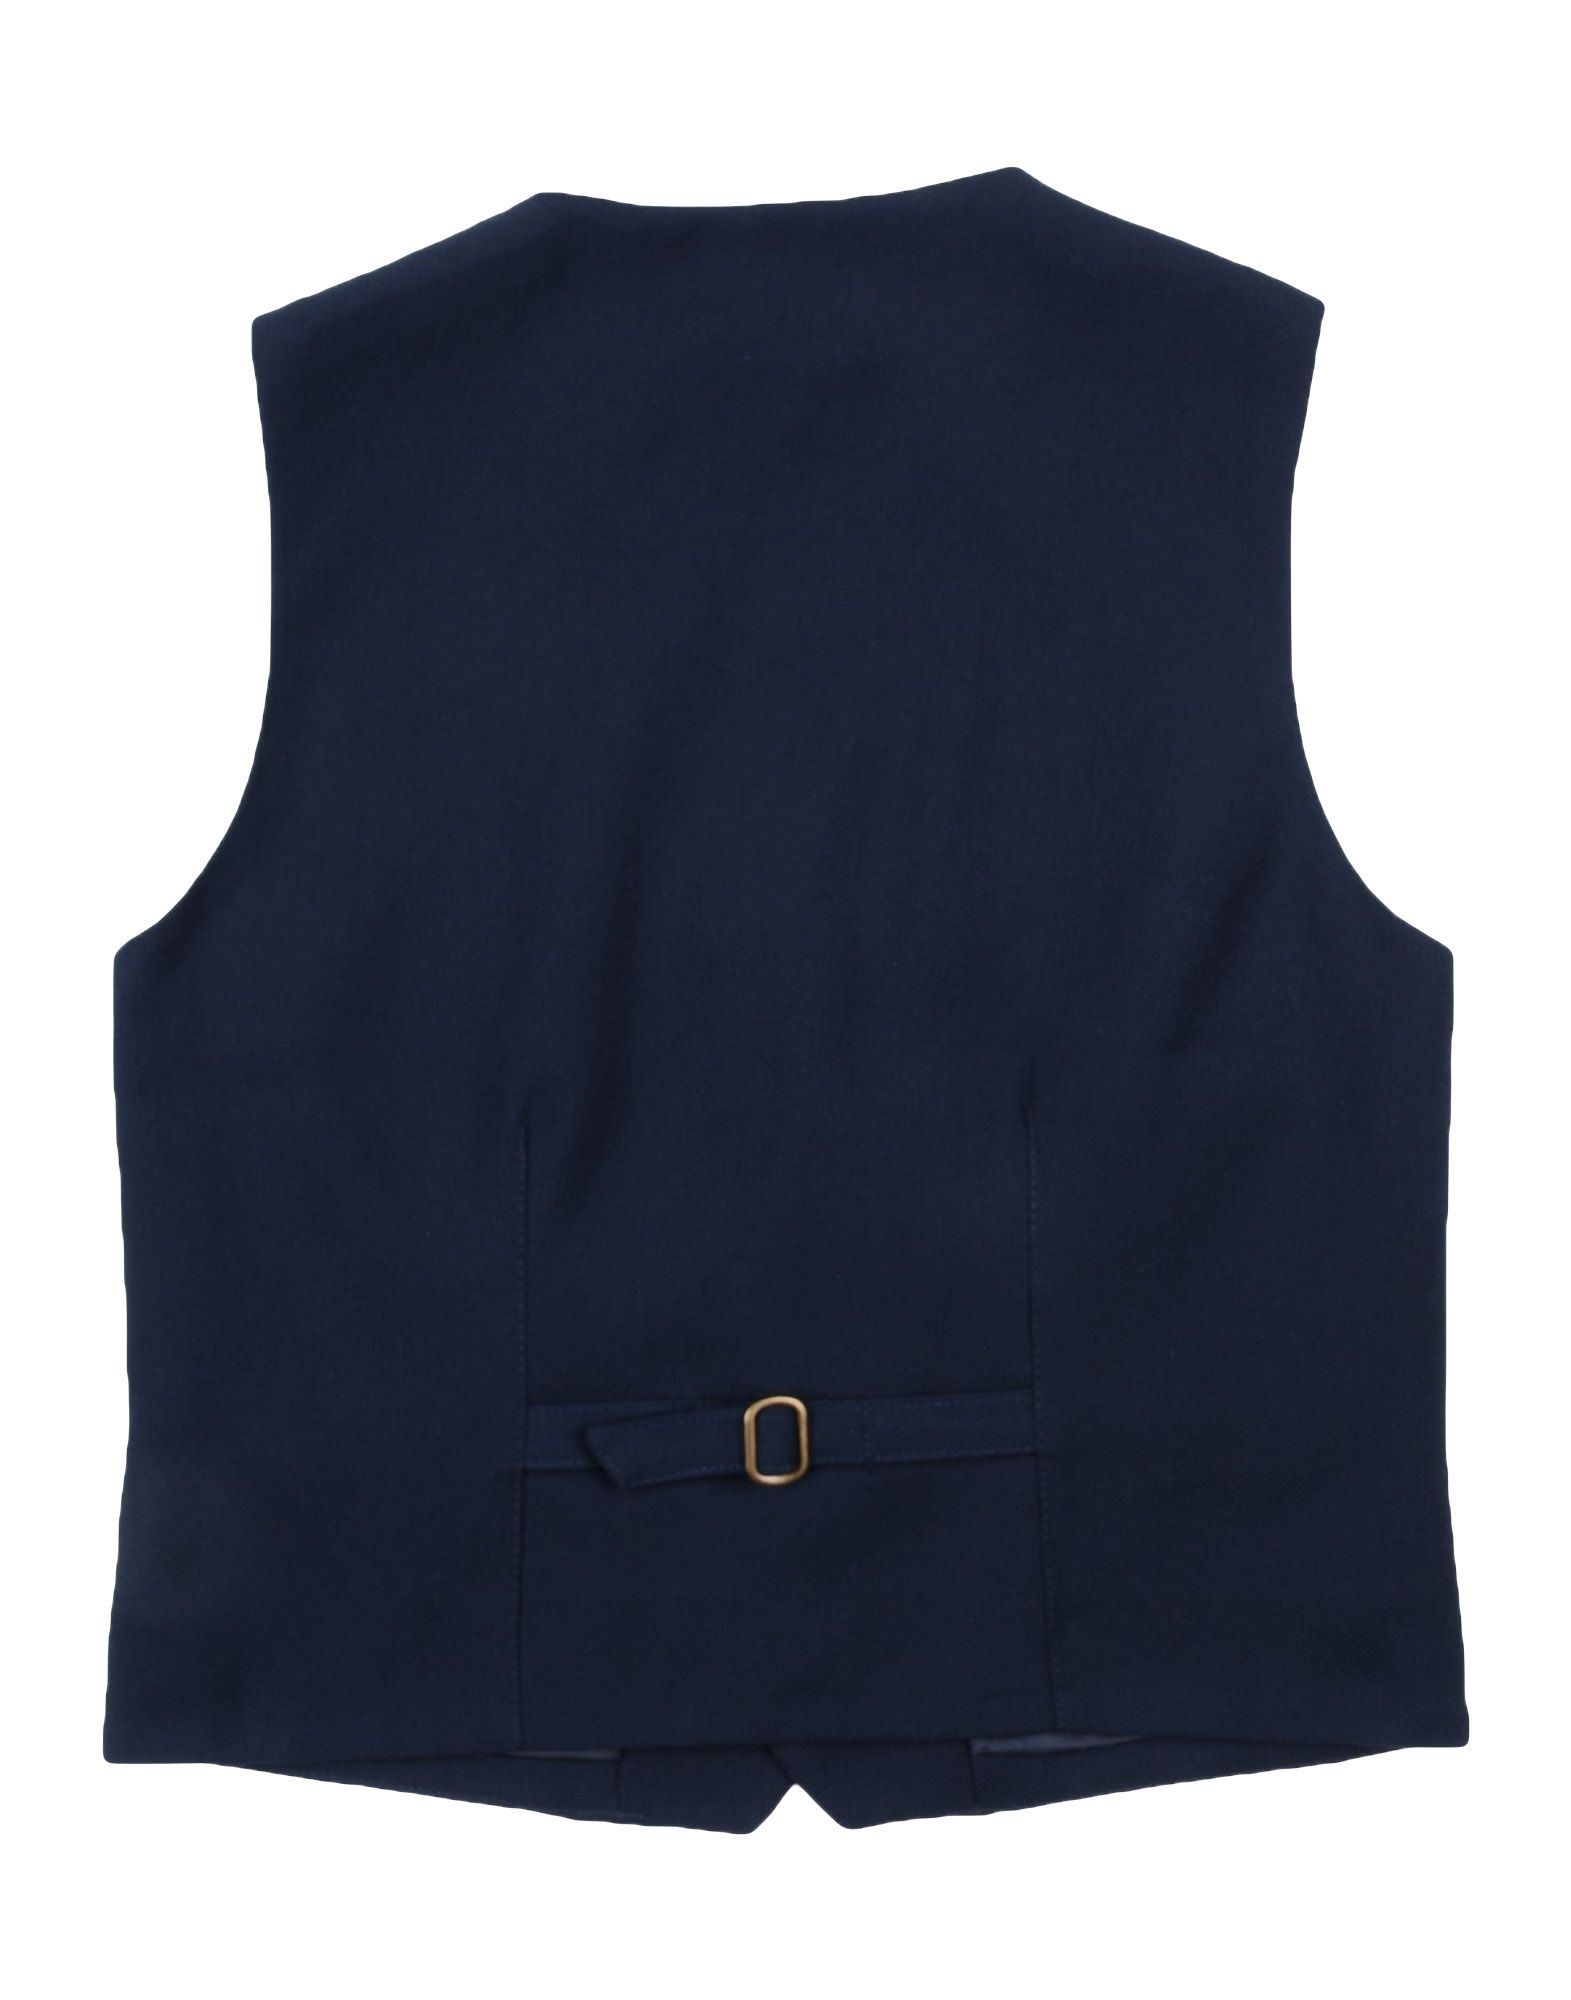 plain weave, logo, solid colour, multipockets, button closing, v-neck, single-breasted , sleeveless, fully lined, wash at 30� c, do not dry clean, iron at 110� c max, do not bleach, tumble dryable, button closing waistcoat with belt, large sized